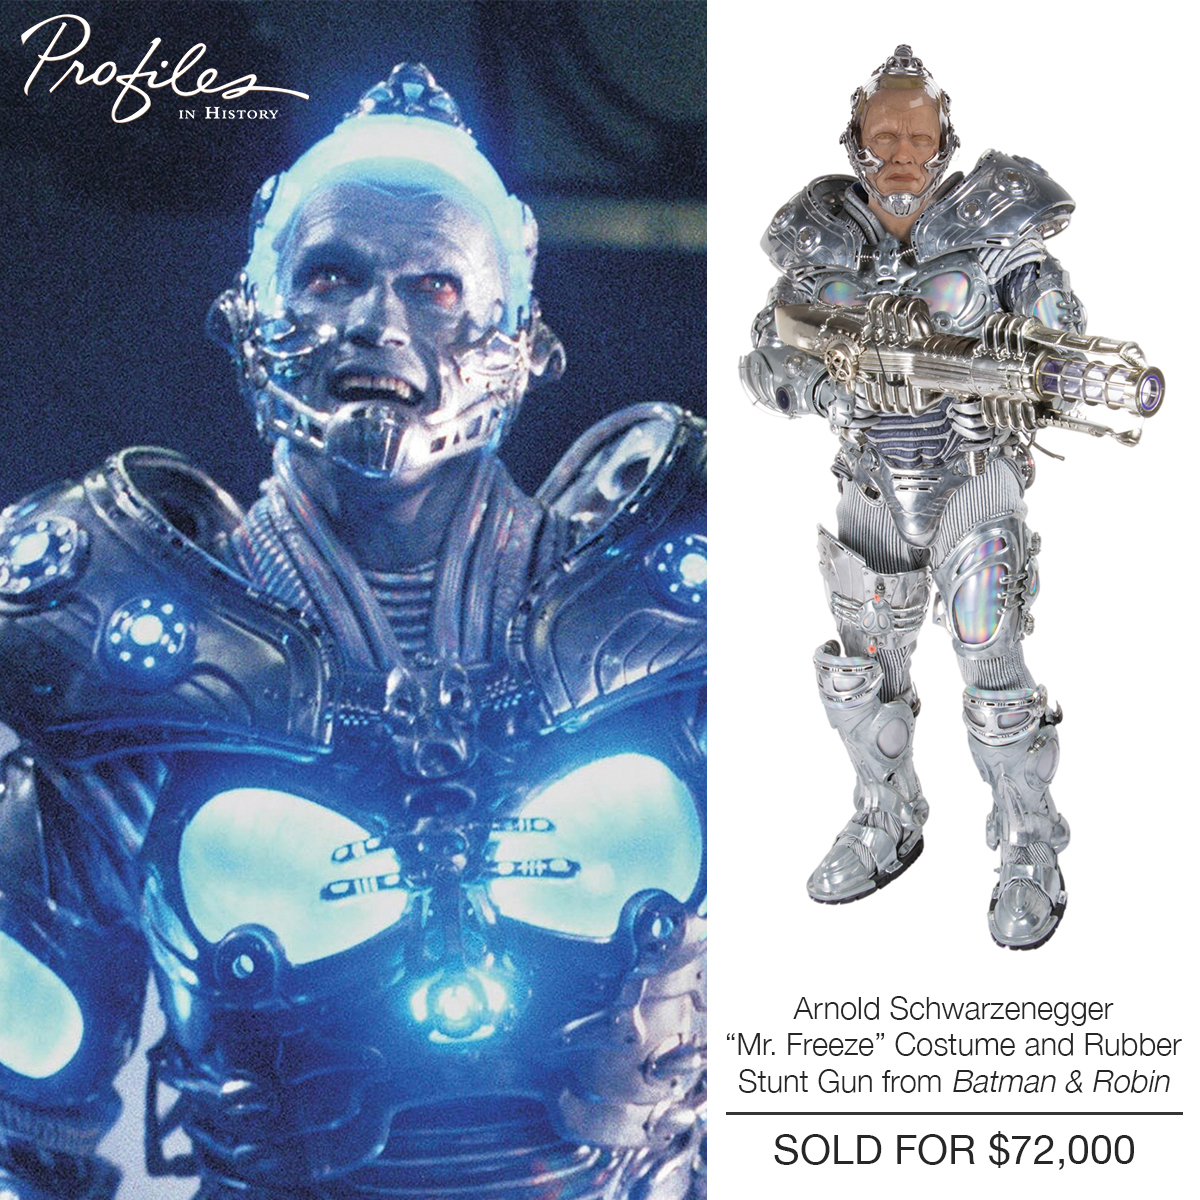 Profiles In History Who Remembers Arnold Schwarzenegger As Mr Freeze In Batman Robin 1997 His Costume And Rubber Stunt Gun Sold For 72 000 By Profiles In History T Co Mgwymi8vjb